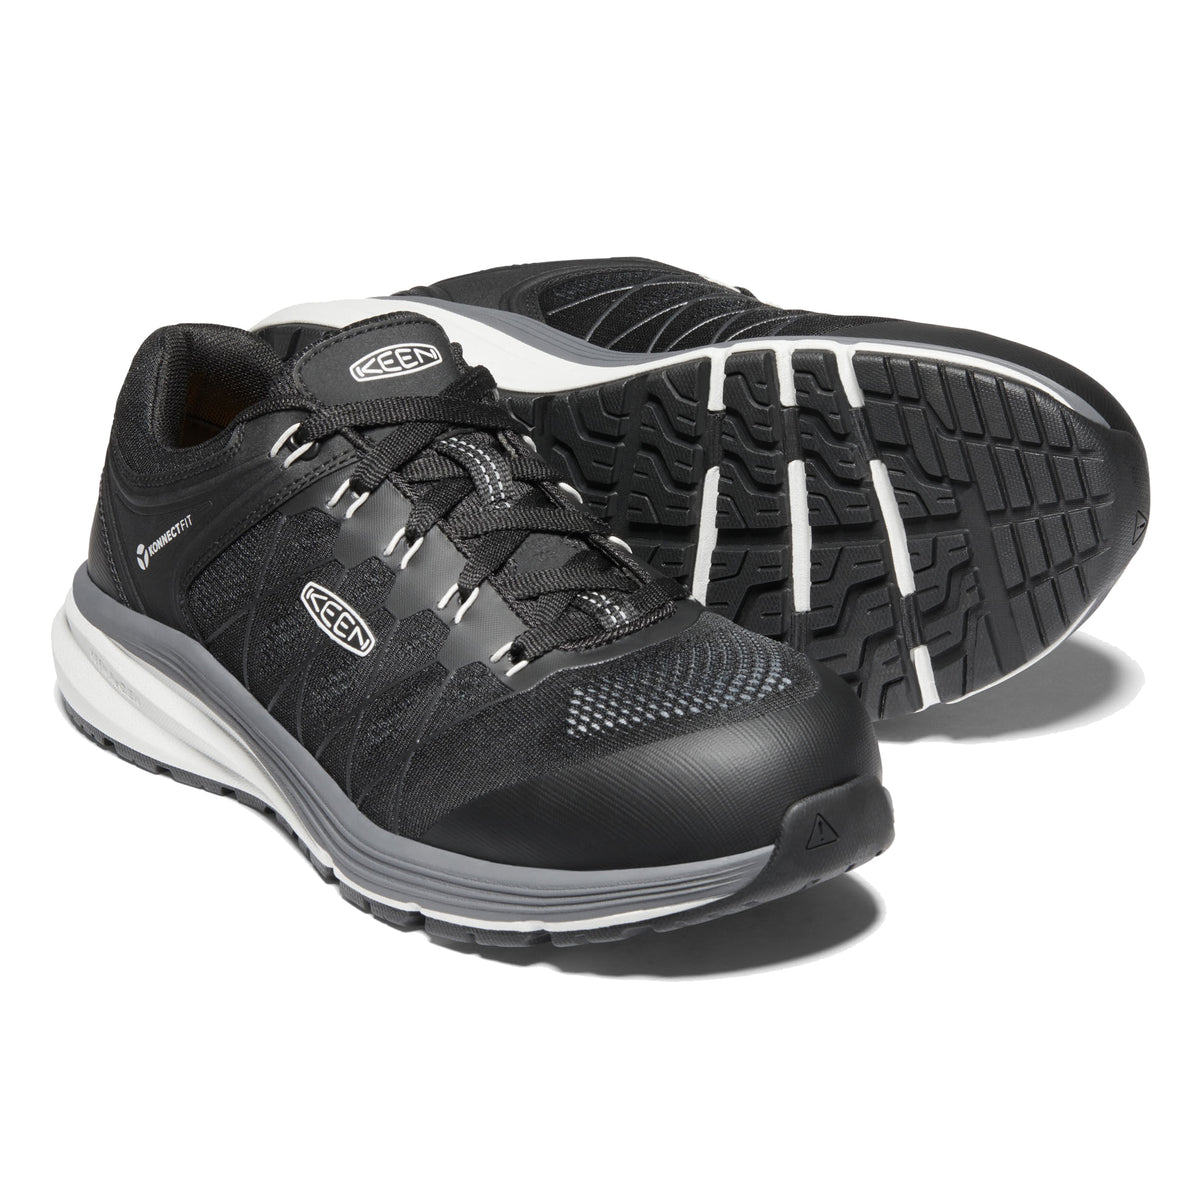 A pair of black Keen Composite Toe Vista Energy Vapor/Black - Men&#39;s athletic shoes with safety toe work shoe features, on a white background.